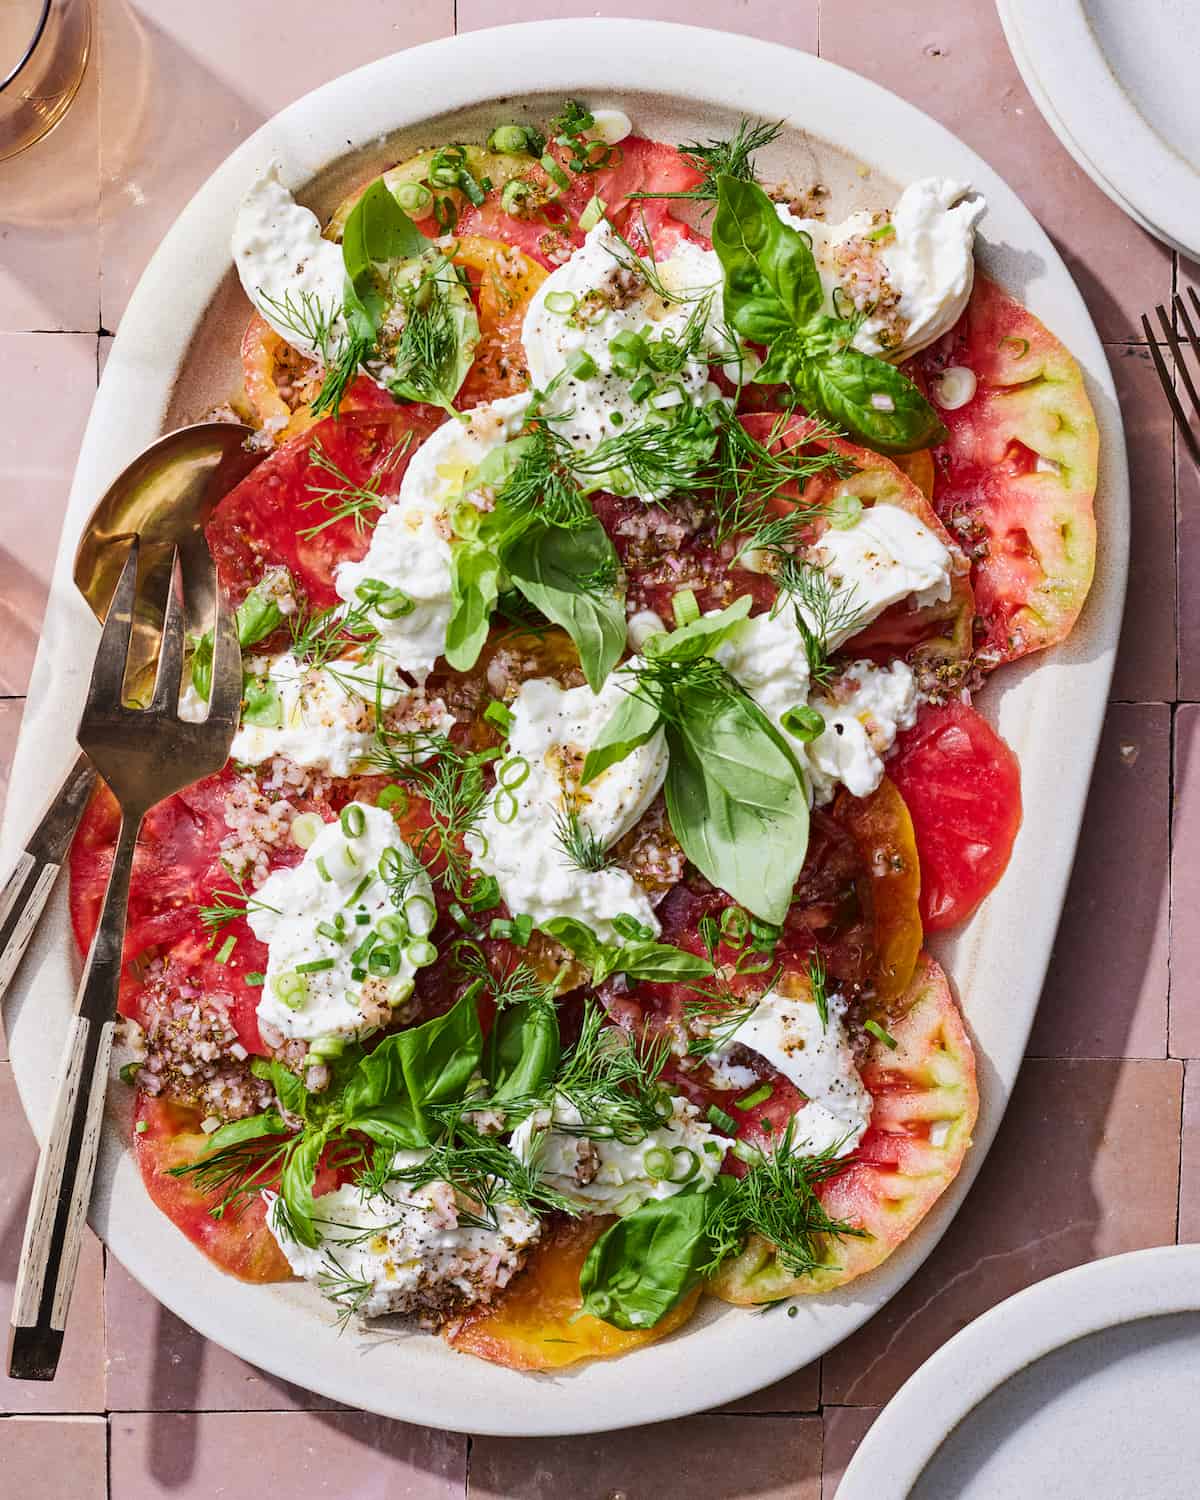 A serving platter with Heirloom tomatoes, burrata, fresh herbs, and oregano.  